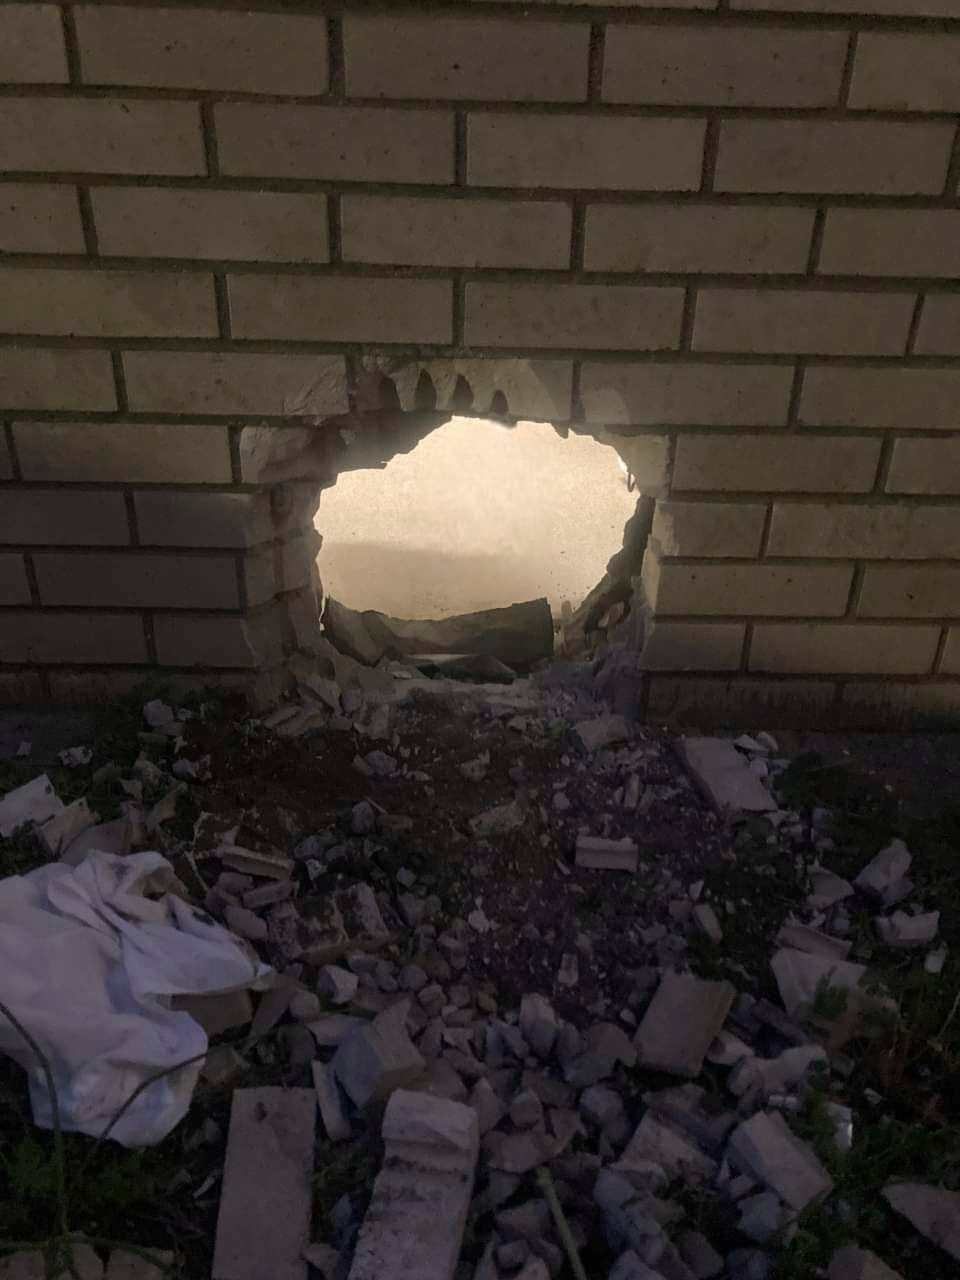 The hole in the Newport News jail wall.